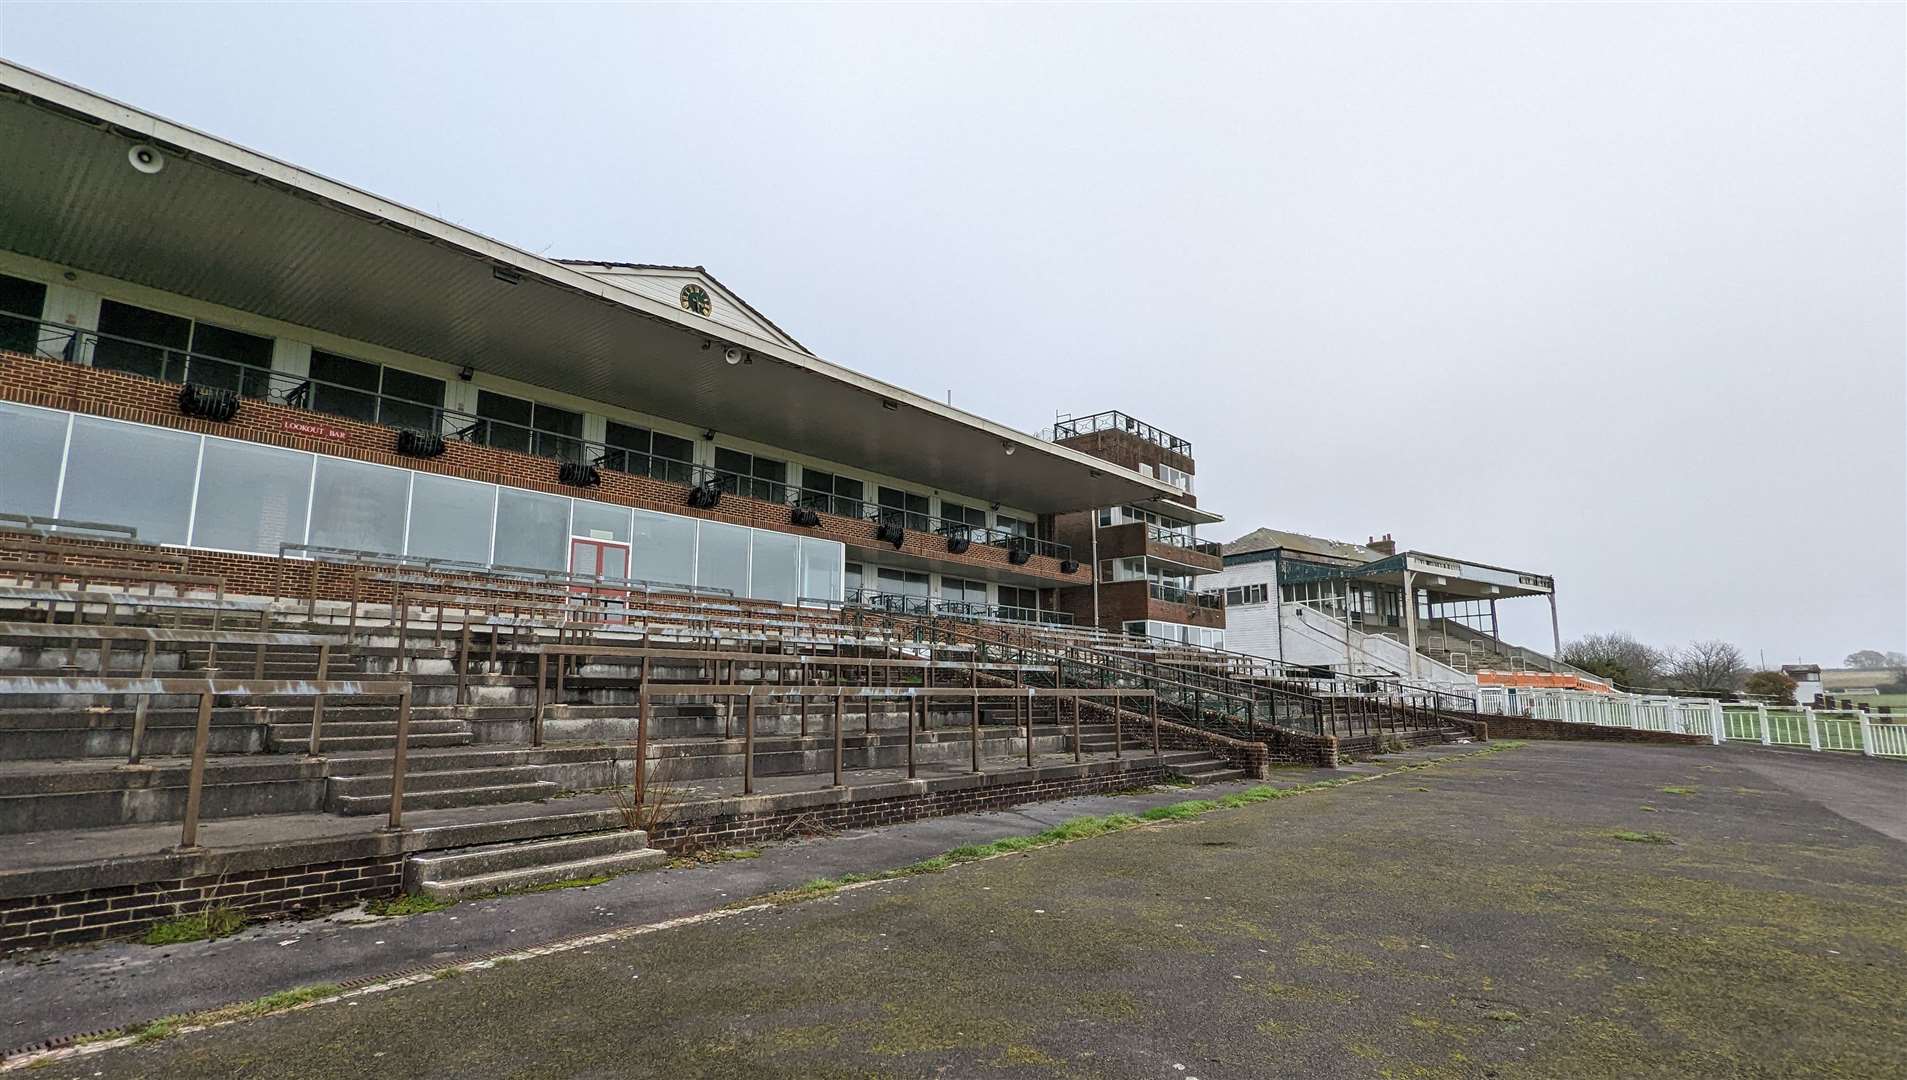 The stands at the former racecourse will be torn down to make way for the Otterpool Park garden town